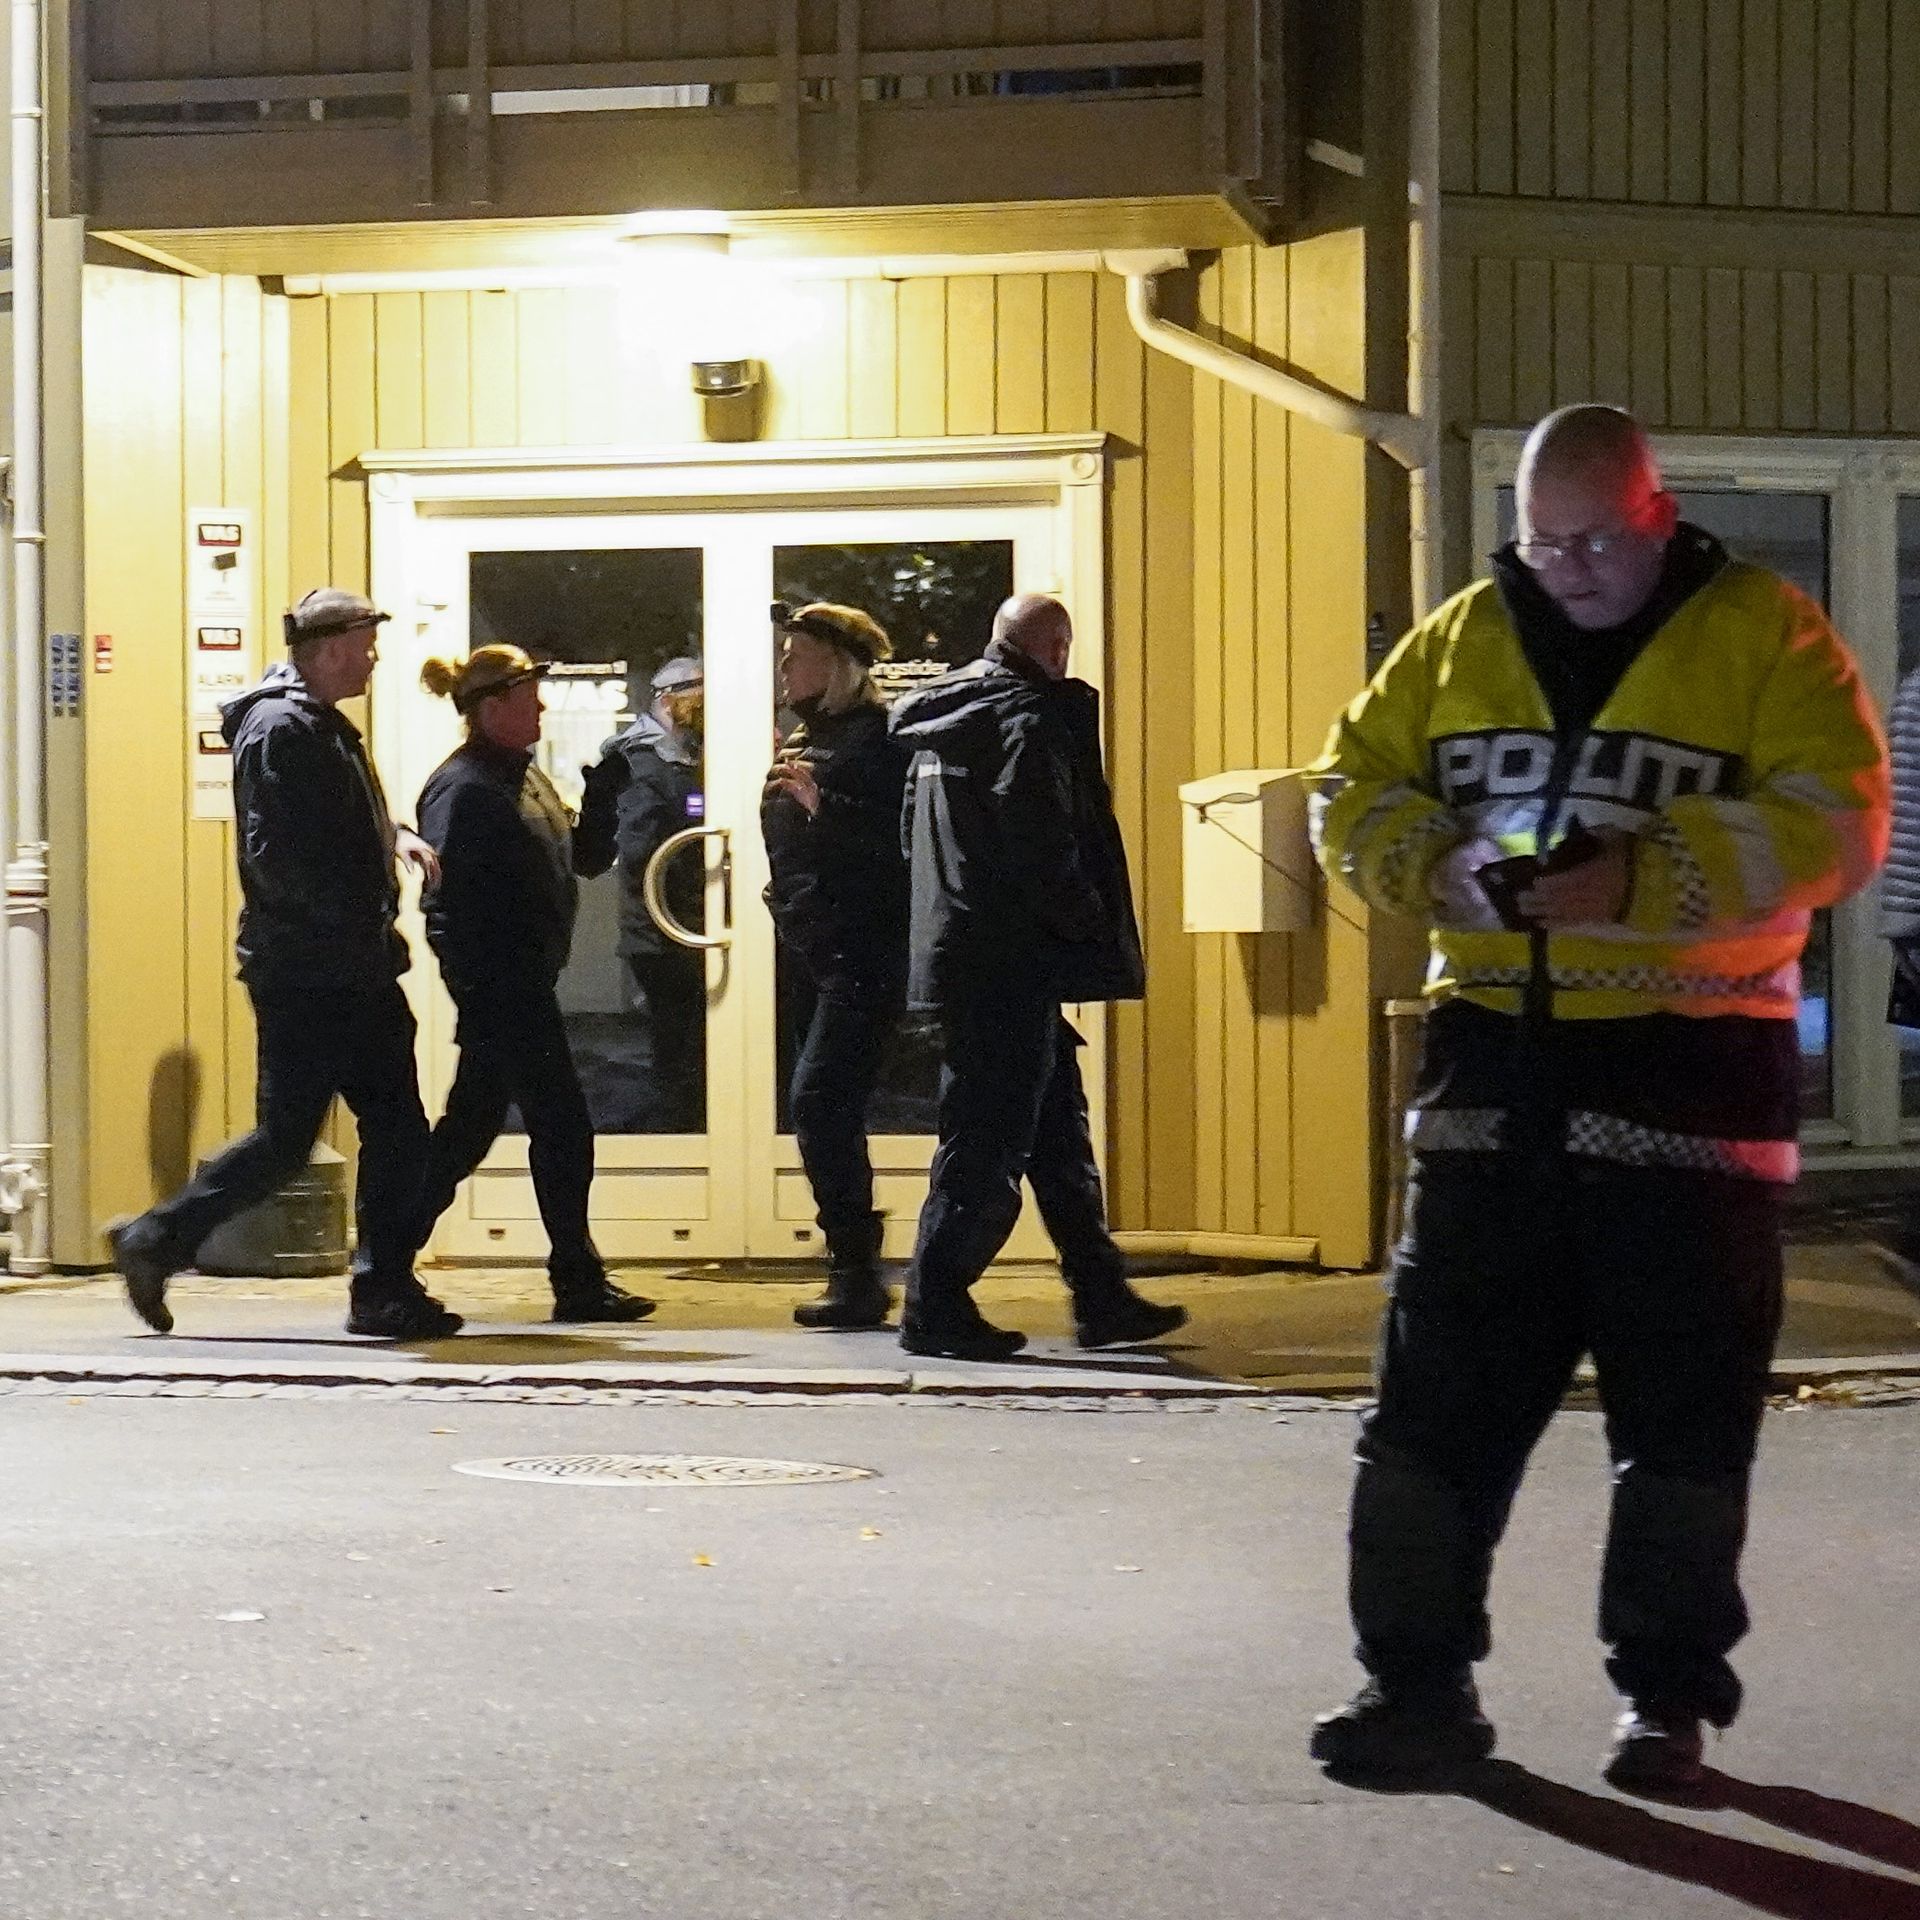 Norway bow and arrow attack: Kongsberg police charge Danish man